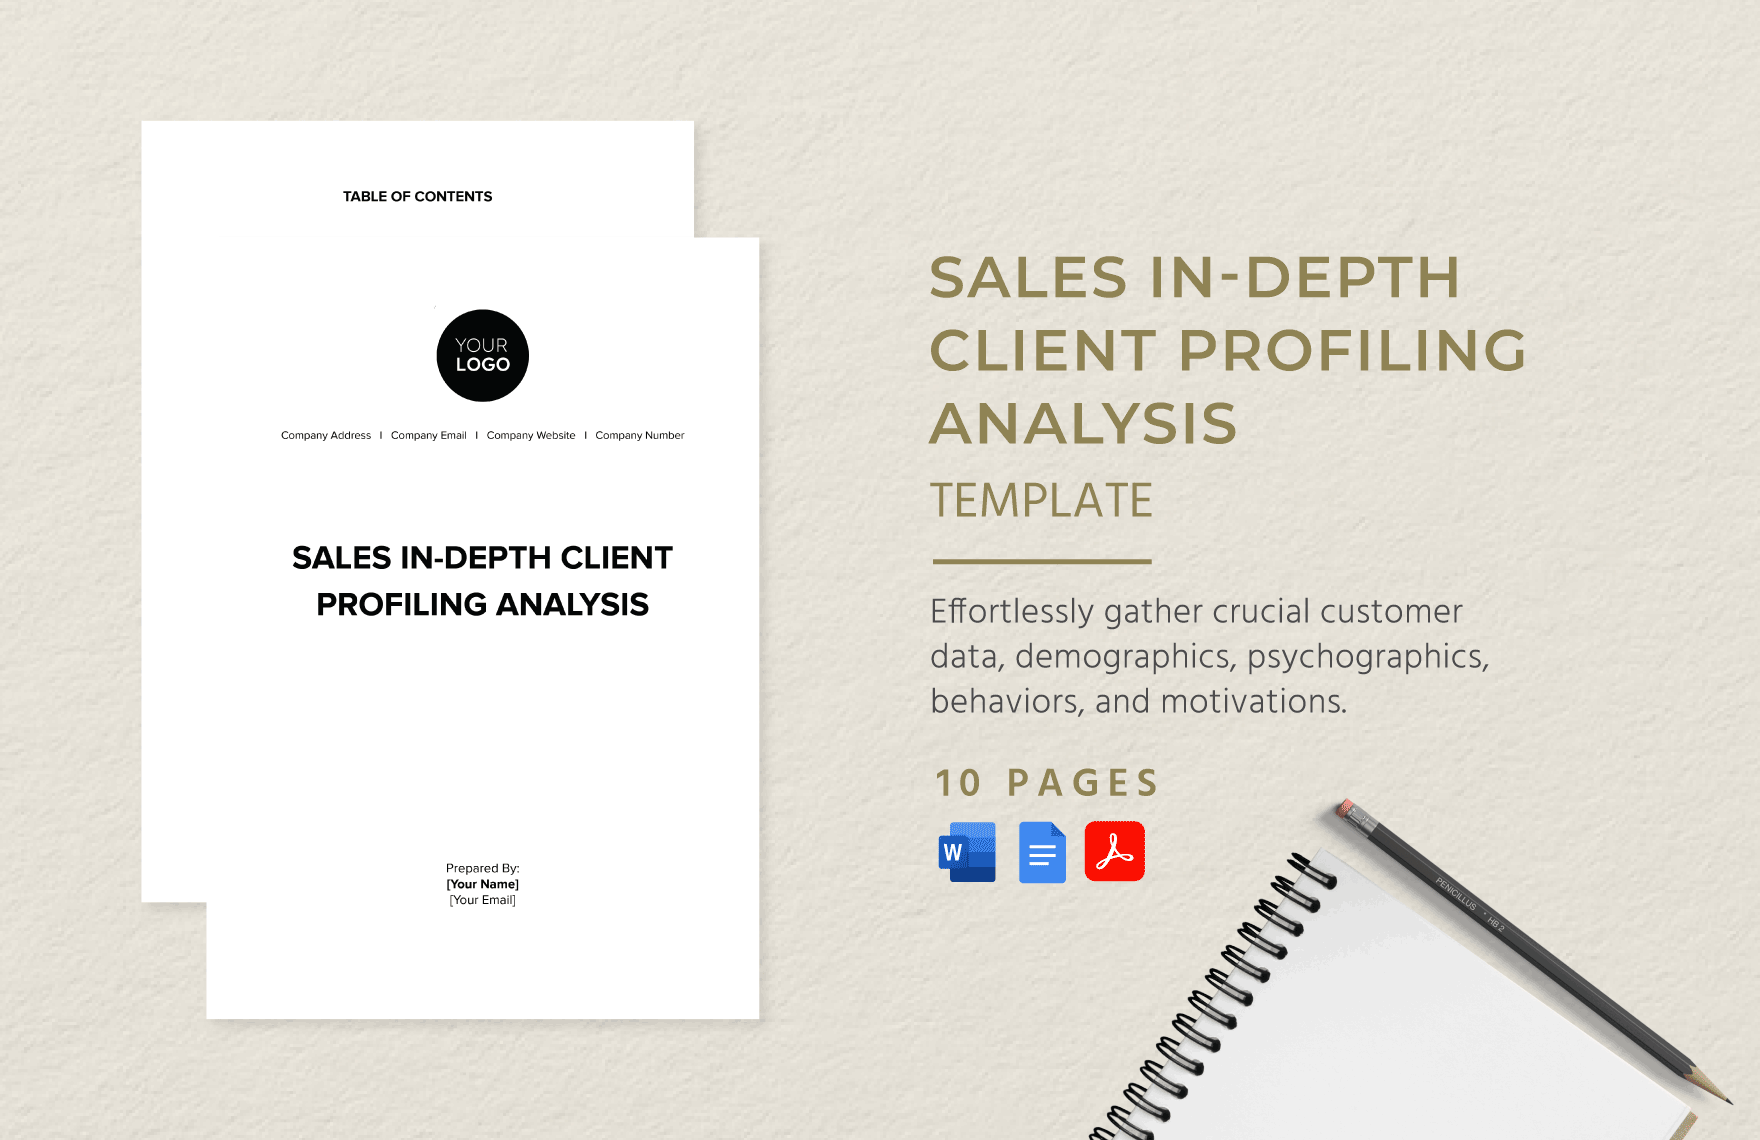 Sales In-depth Client Profiling Analysis Template in Word, Google Docs, PDF